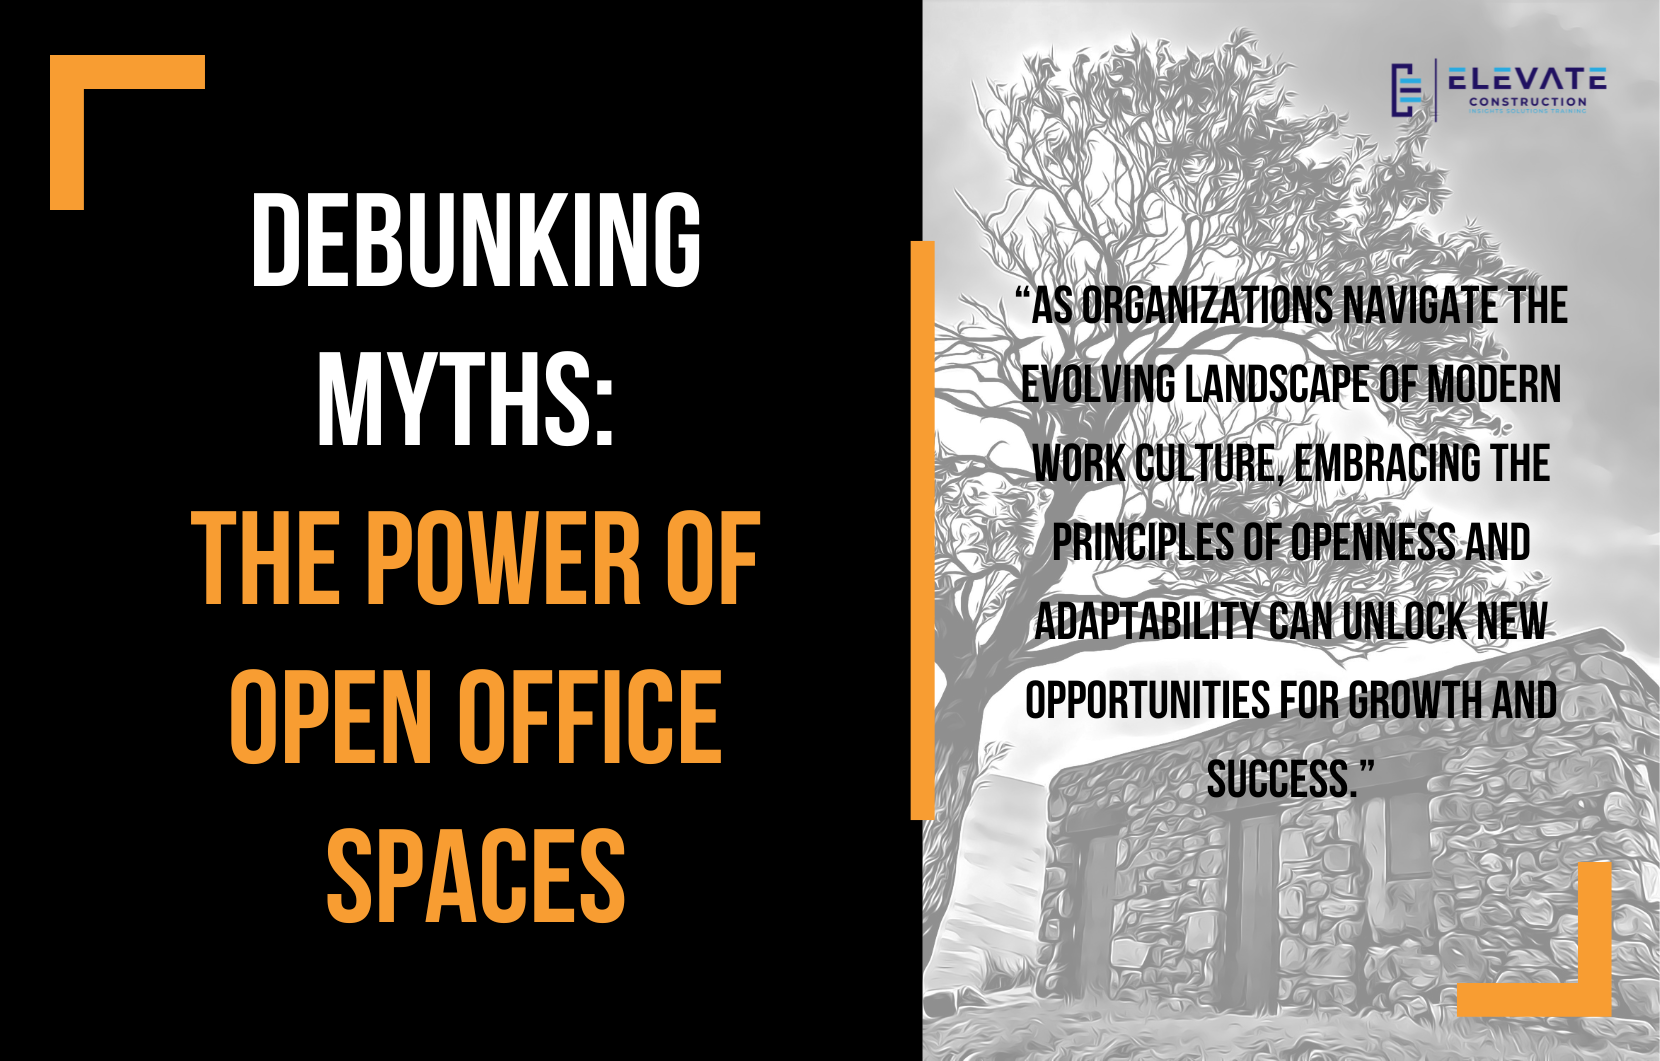 Debunking Myths: The Power of Open Office Spaces